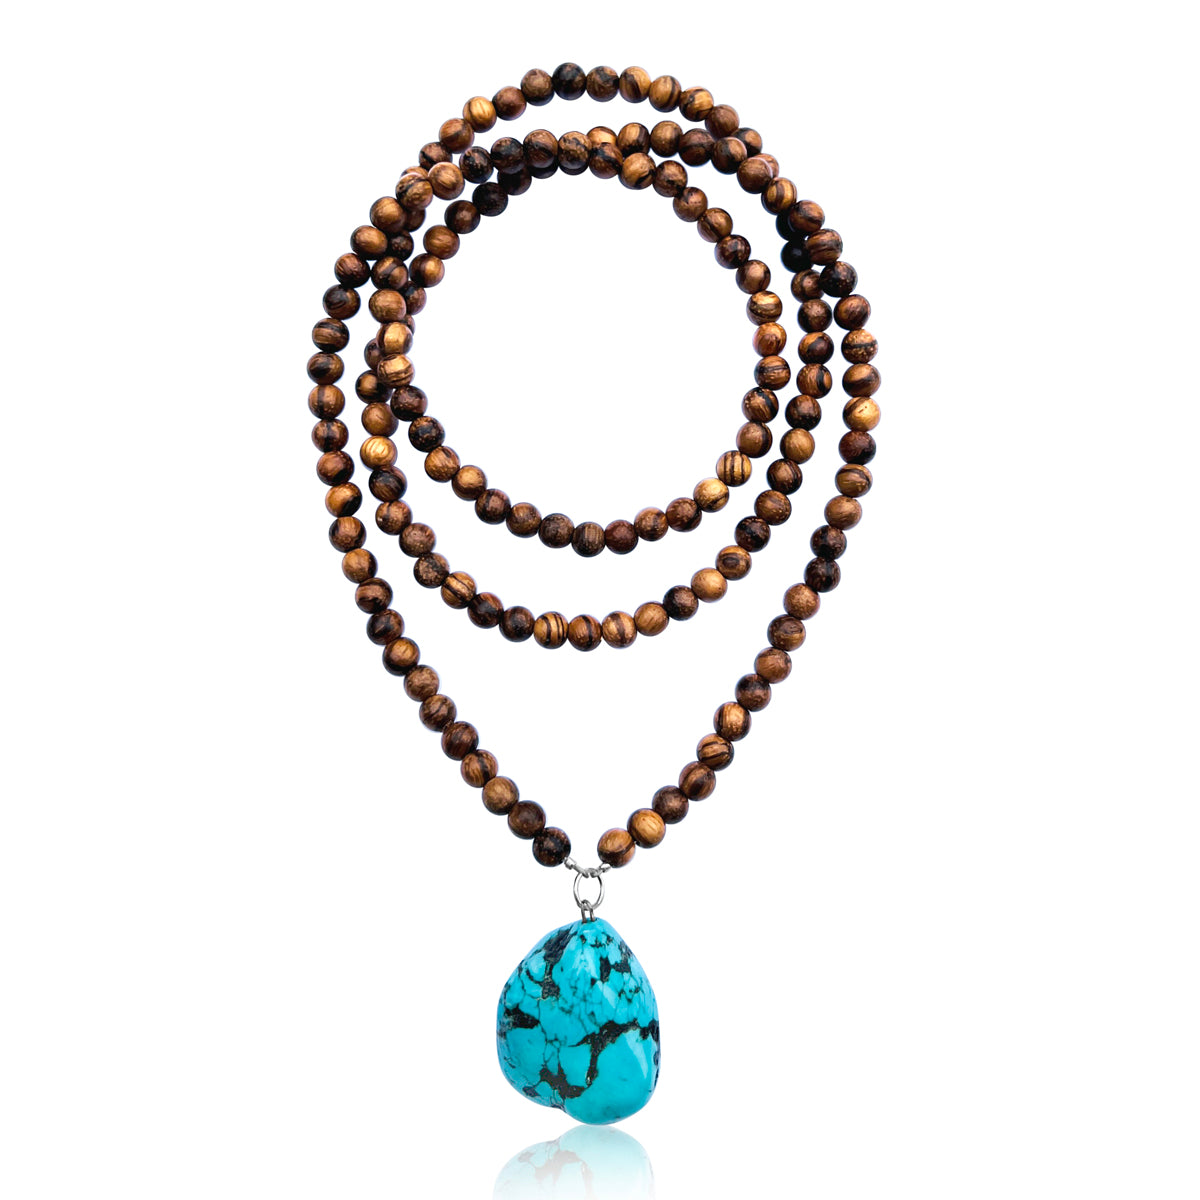 Wearing "The Healing Path - Turquoise & Wood Necklace" is an affirmation of your commitment to personal growth, balance, and well-being. 